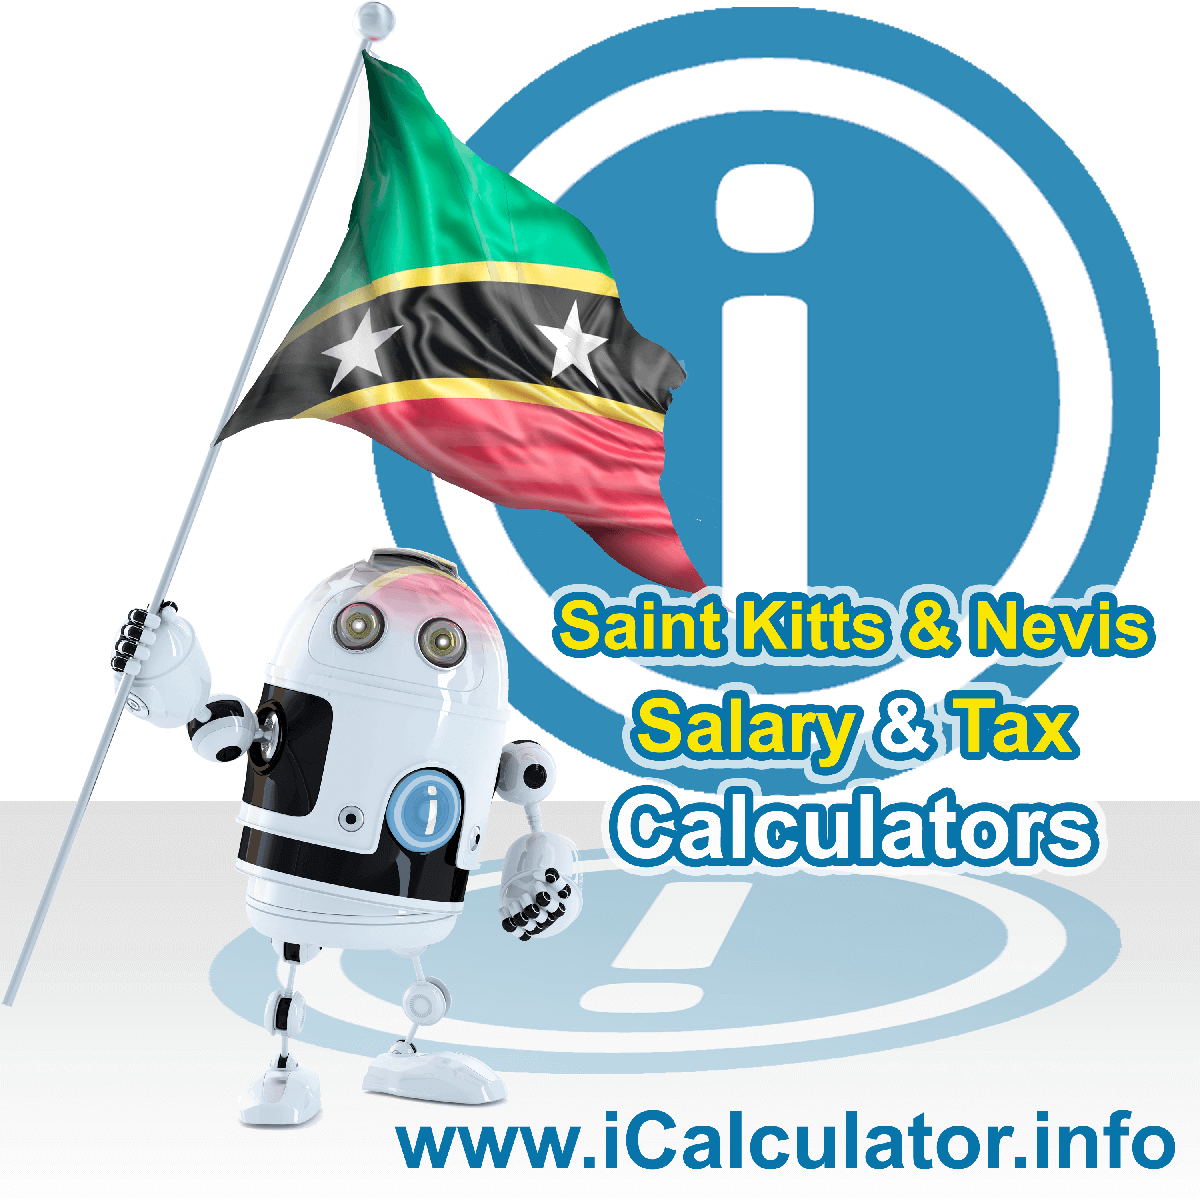 Saint Kitts And Nevis Tax Calculator. This image shows the Saint Kitts And Nevis flag and information relating to the tax formula for the Saint Kitts And Nevis Salary Calculator